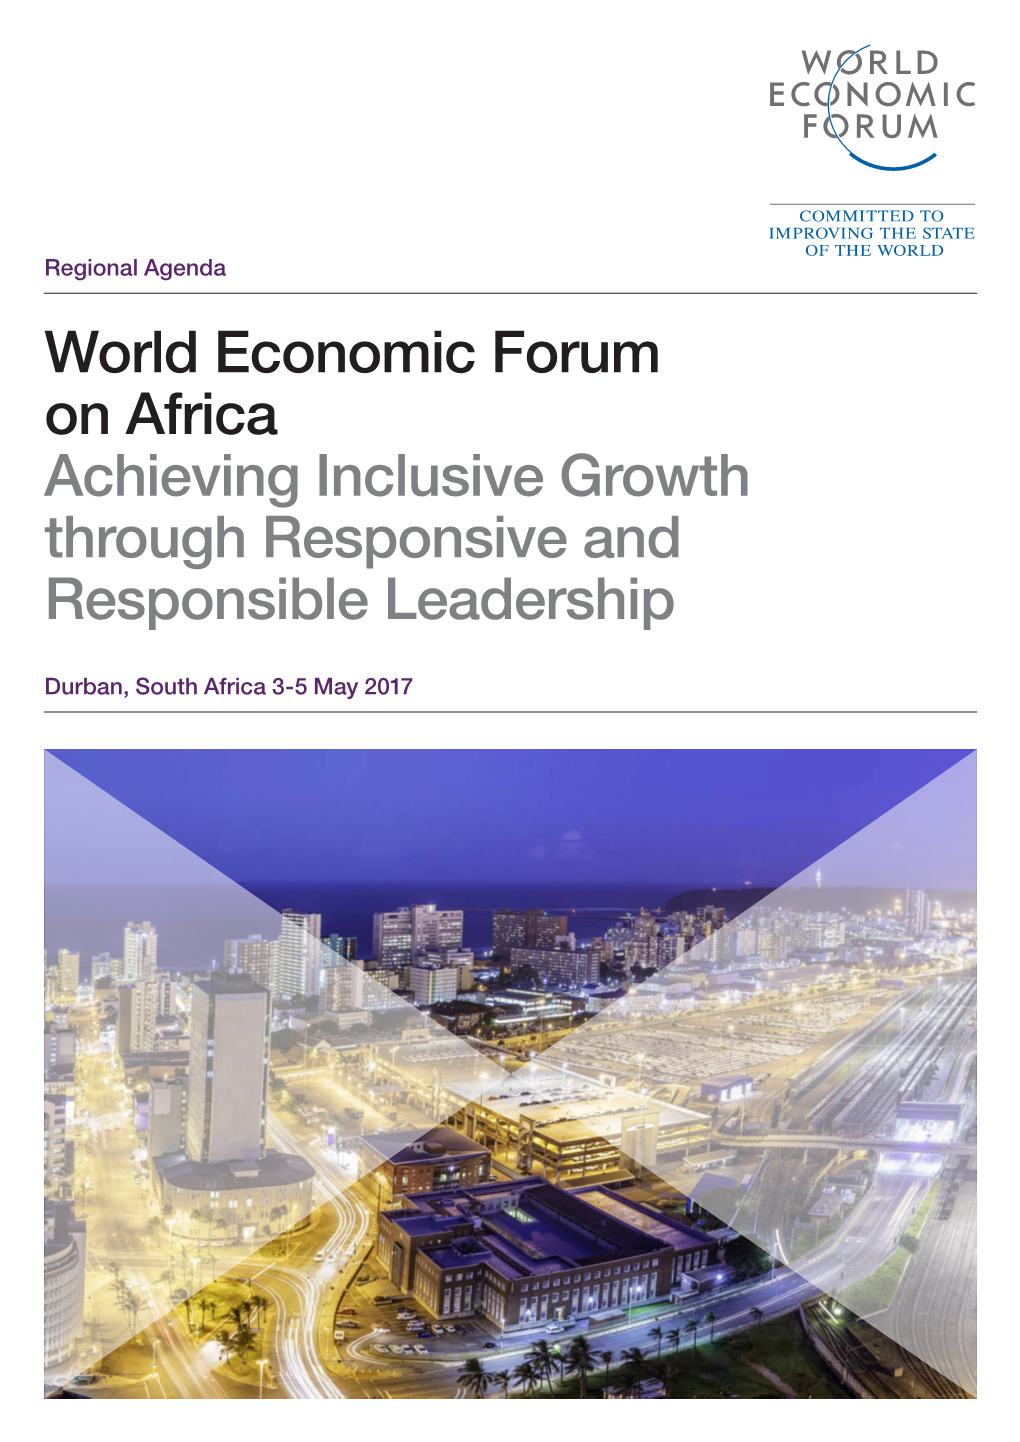 World Economic Forum on Africa Achieving Inclusive Growth Through Responsive and Responsible Leadership